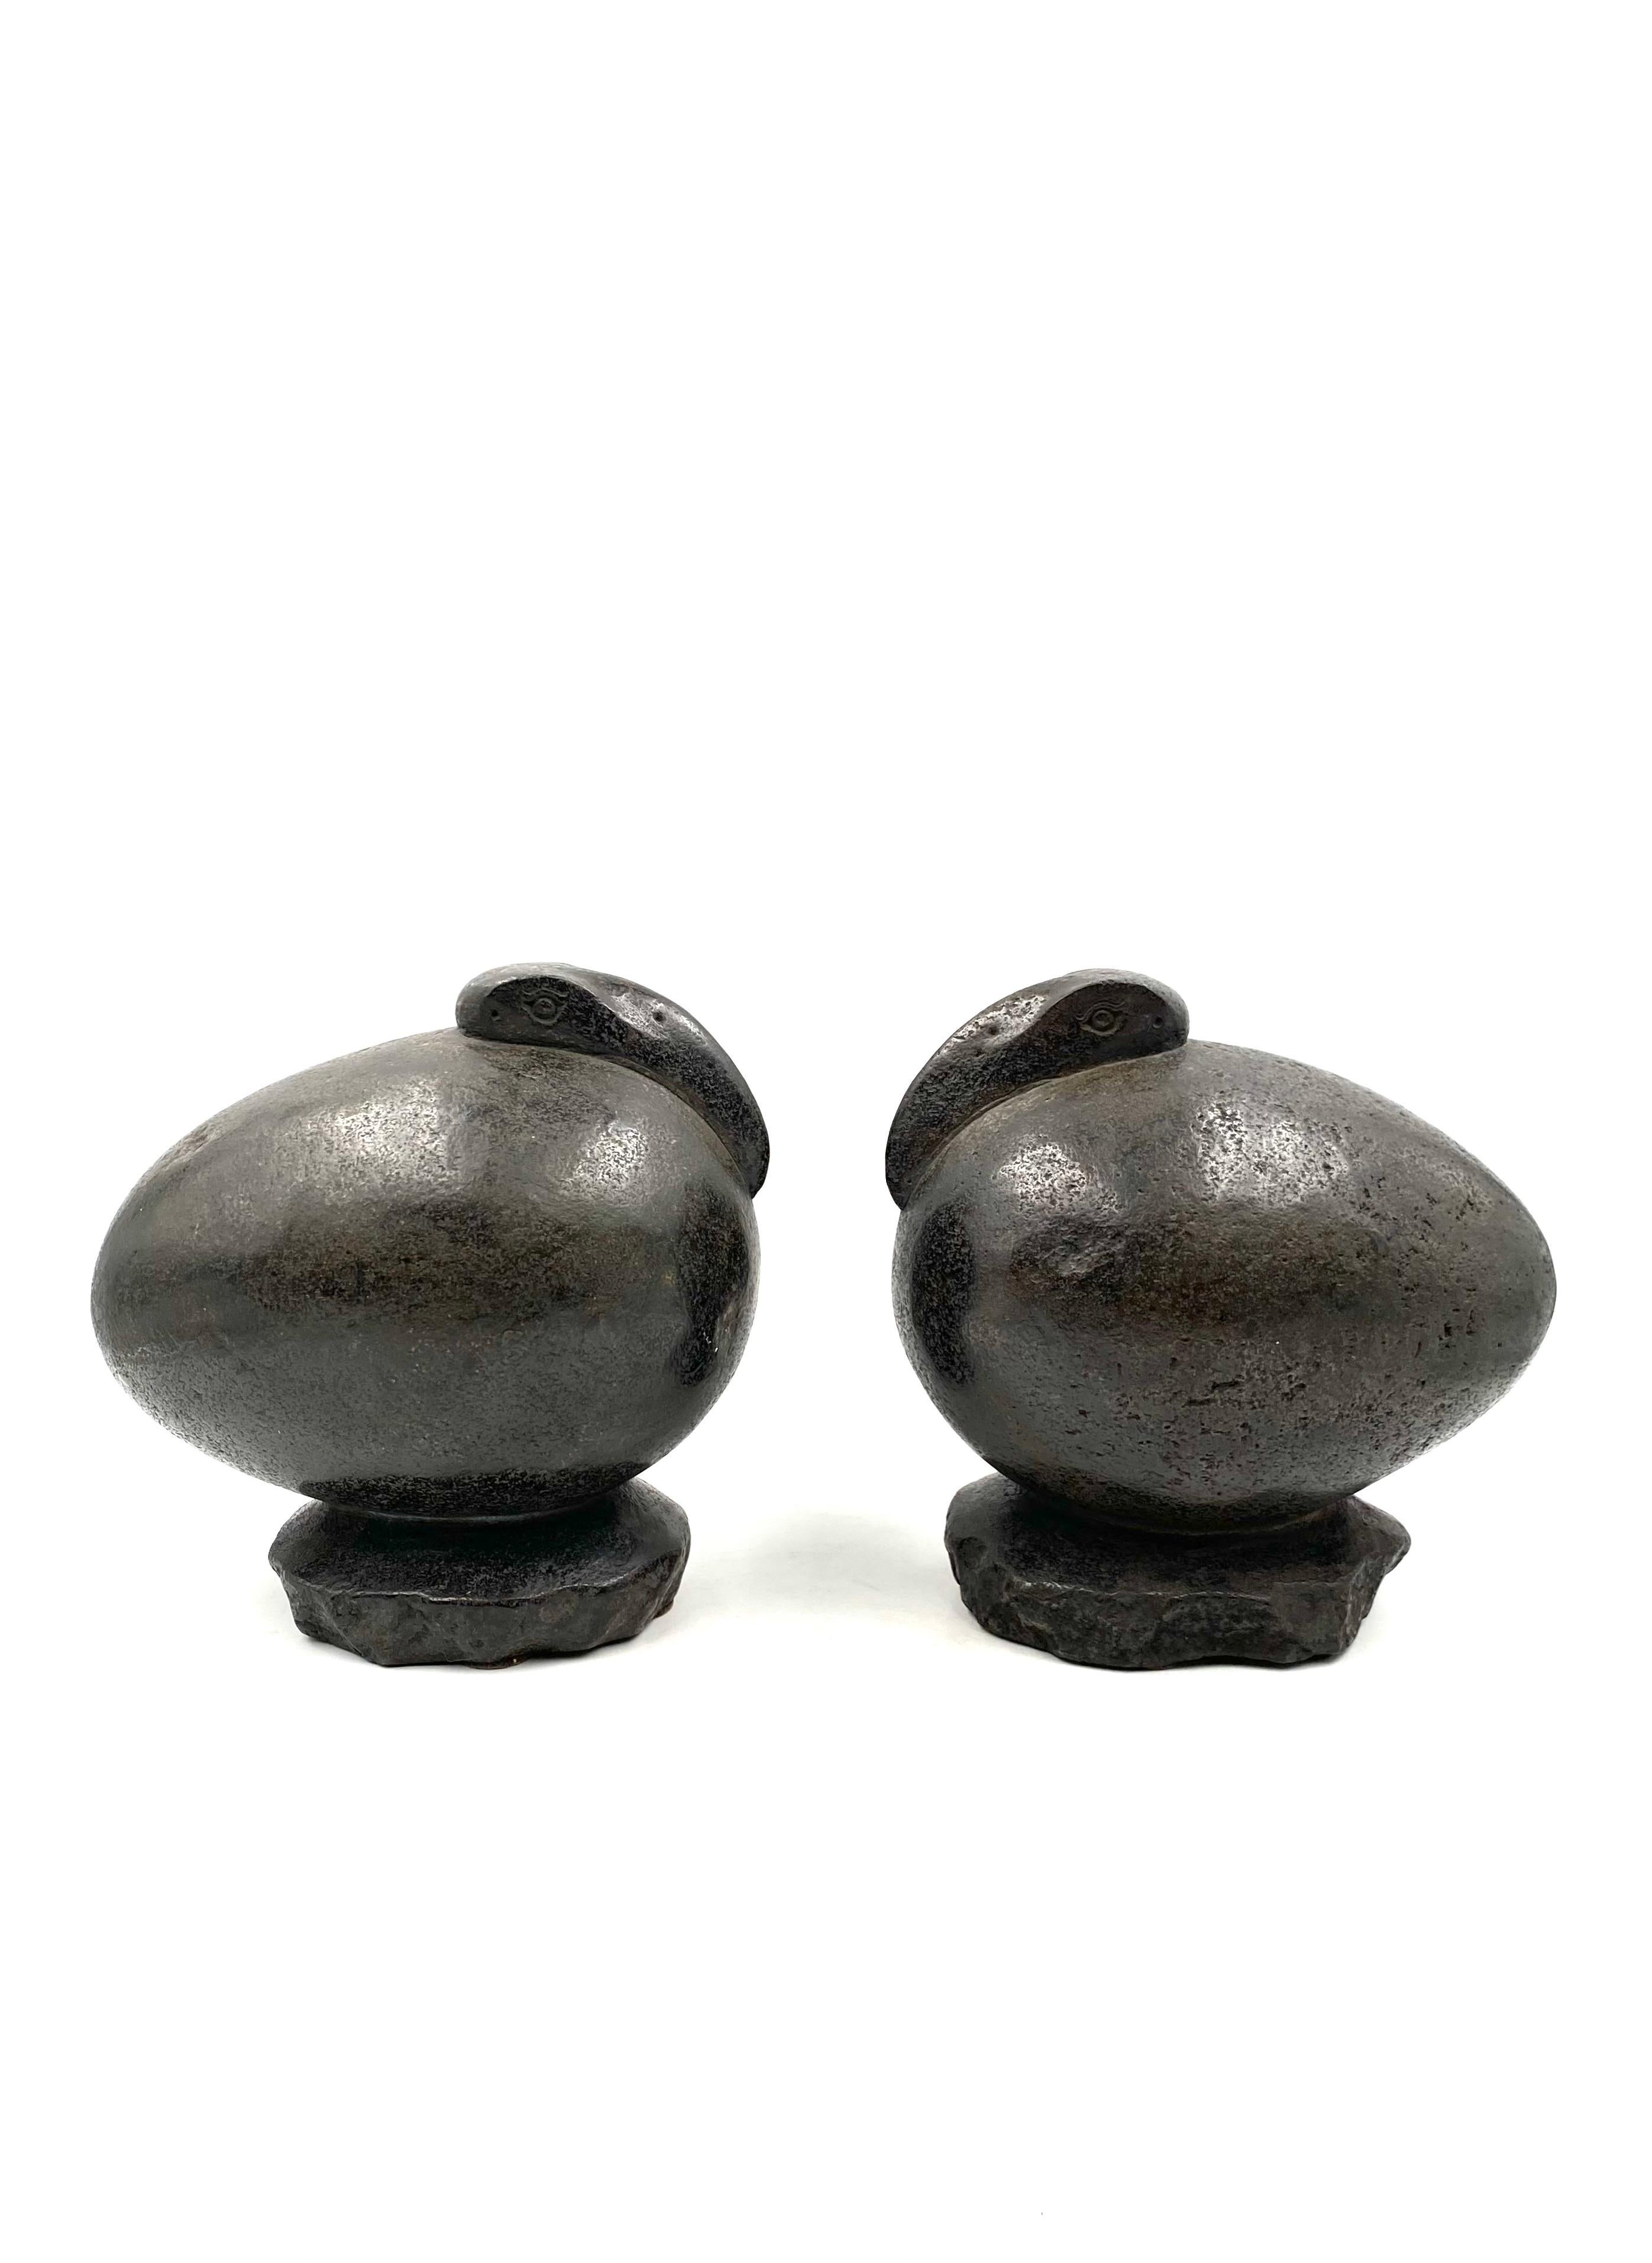 Two egg-shaped Ibis birds sculptures

France early 20th century

Solid raw black Basalt

Measures: H 26 cm

27 x 17 cm

7 kg / piece

Conditions: excellent consistent with age and use.